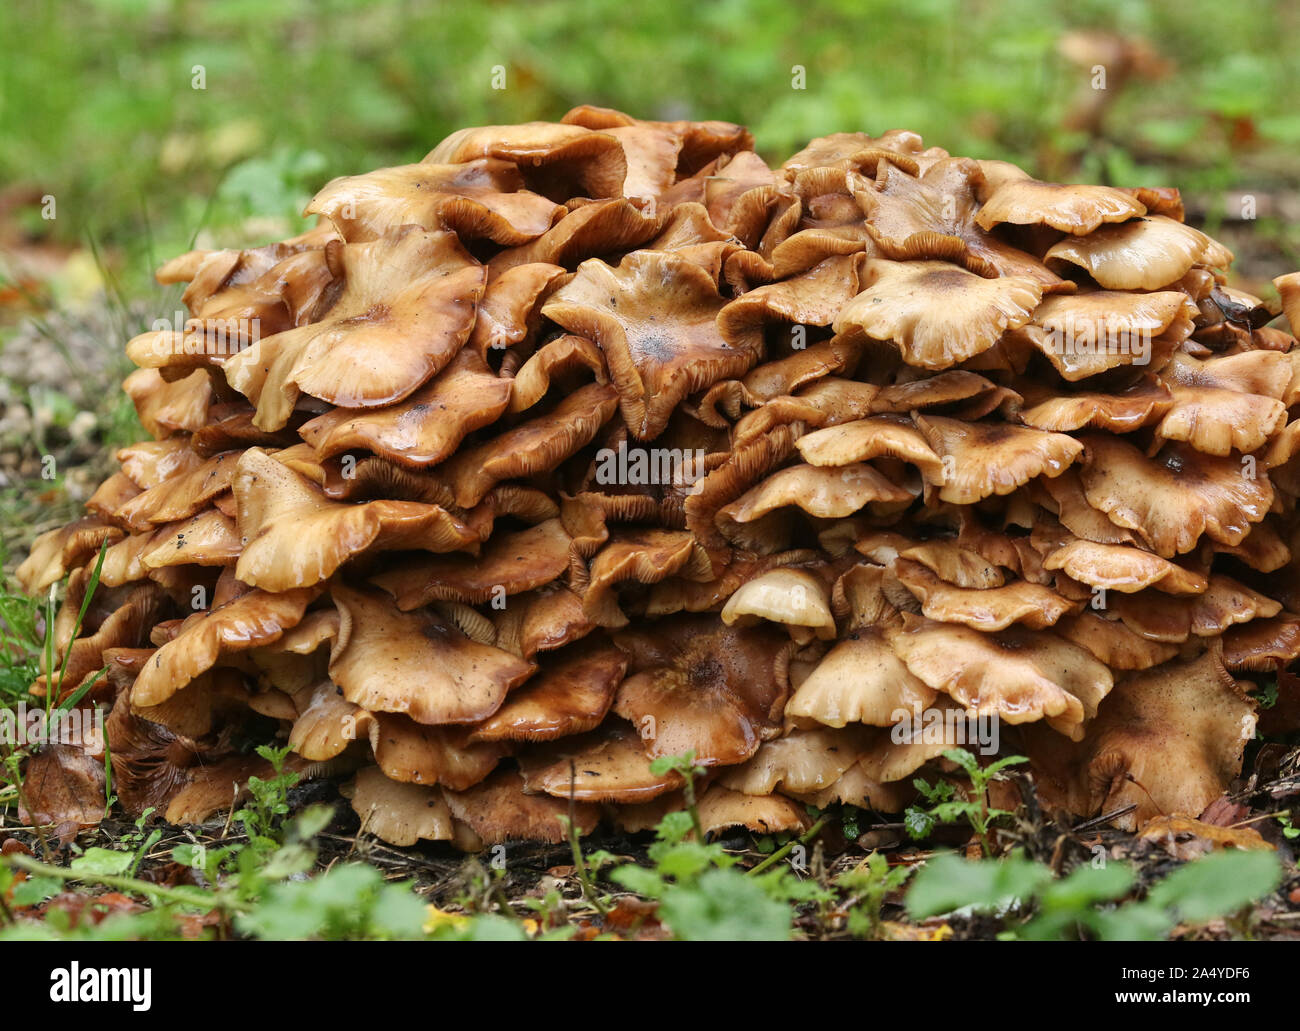 Honey Fungus, growing from a decaying tree stump in a field in the UK. Stock Photo